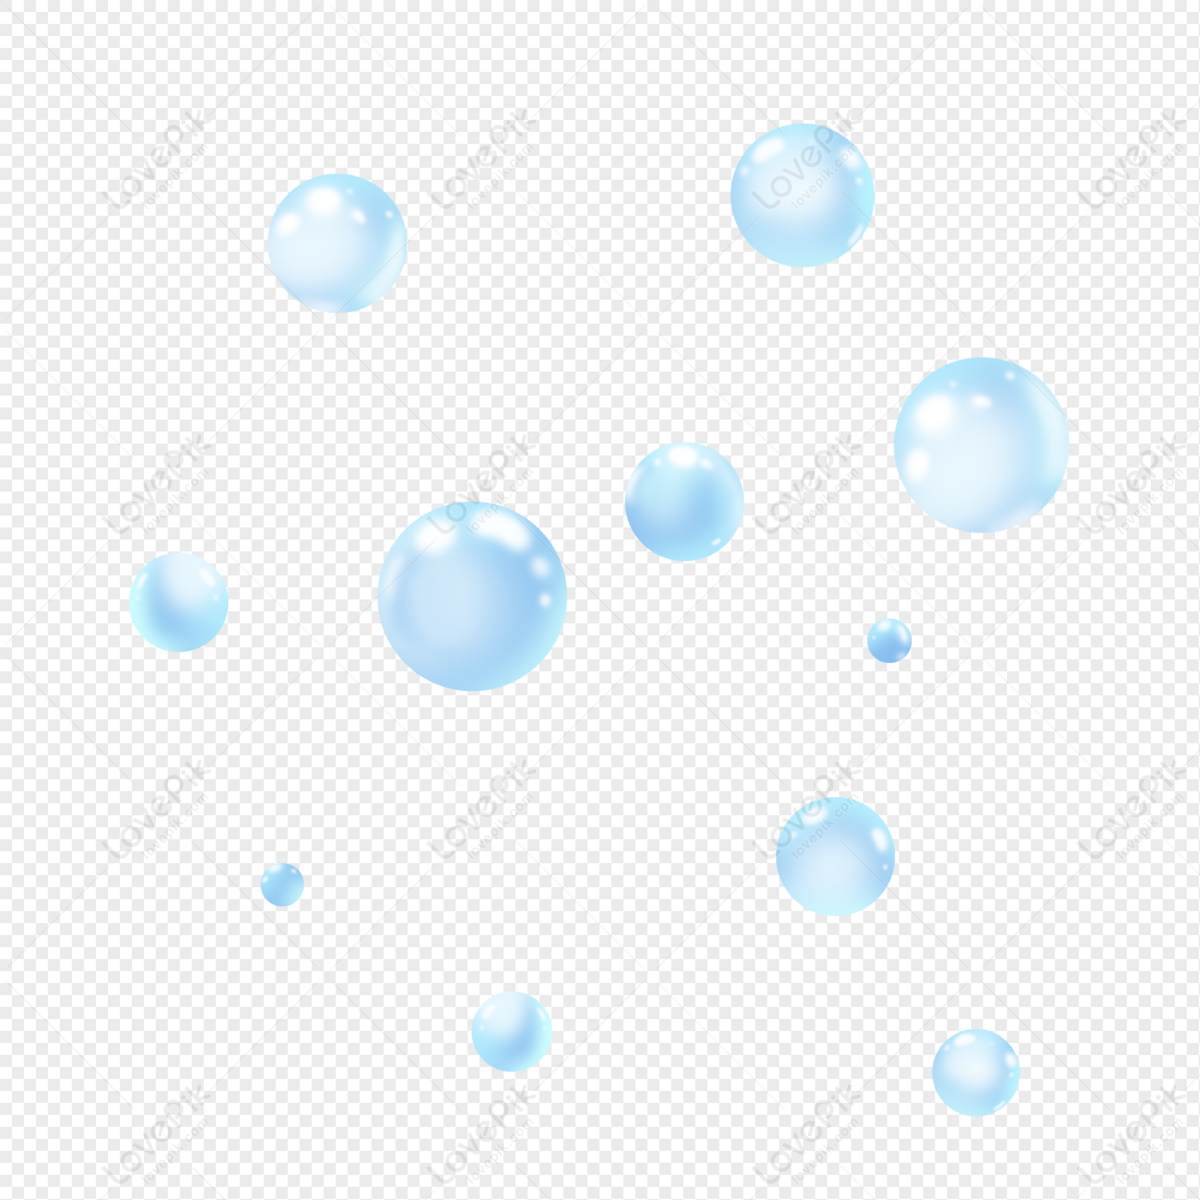 Light Blue Bubble PNG Image And Clipart Image For Free Download - Lovepik |  401280088